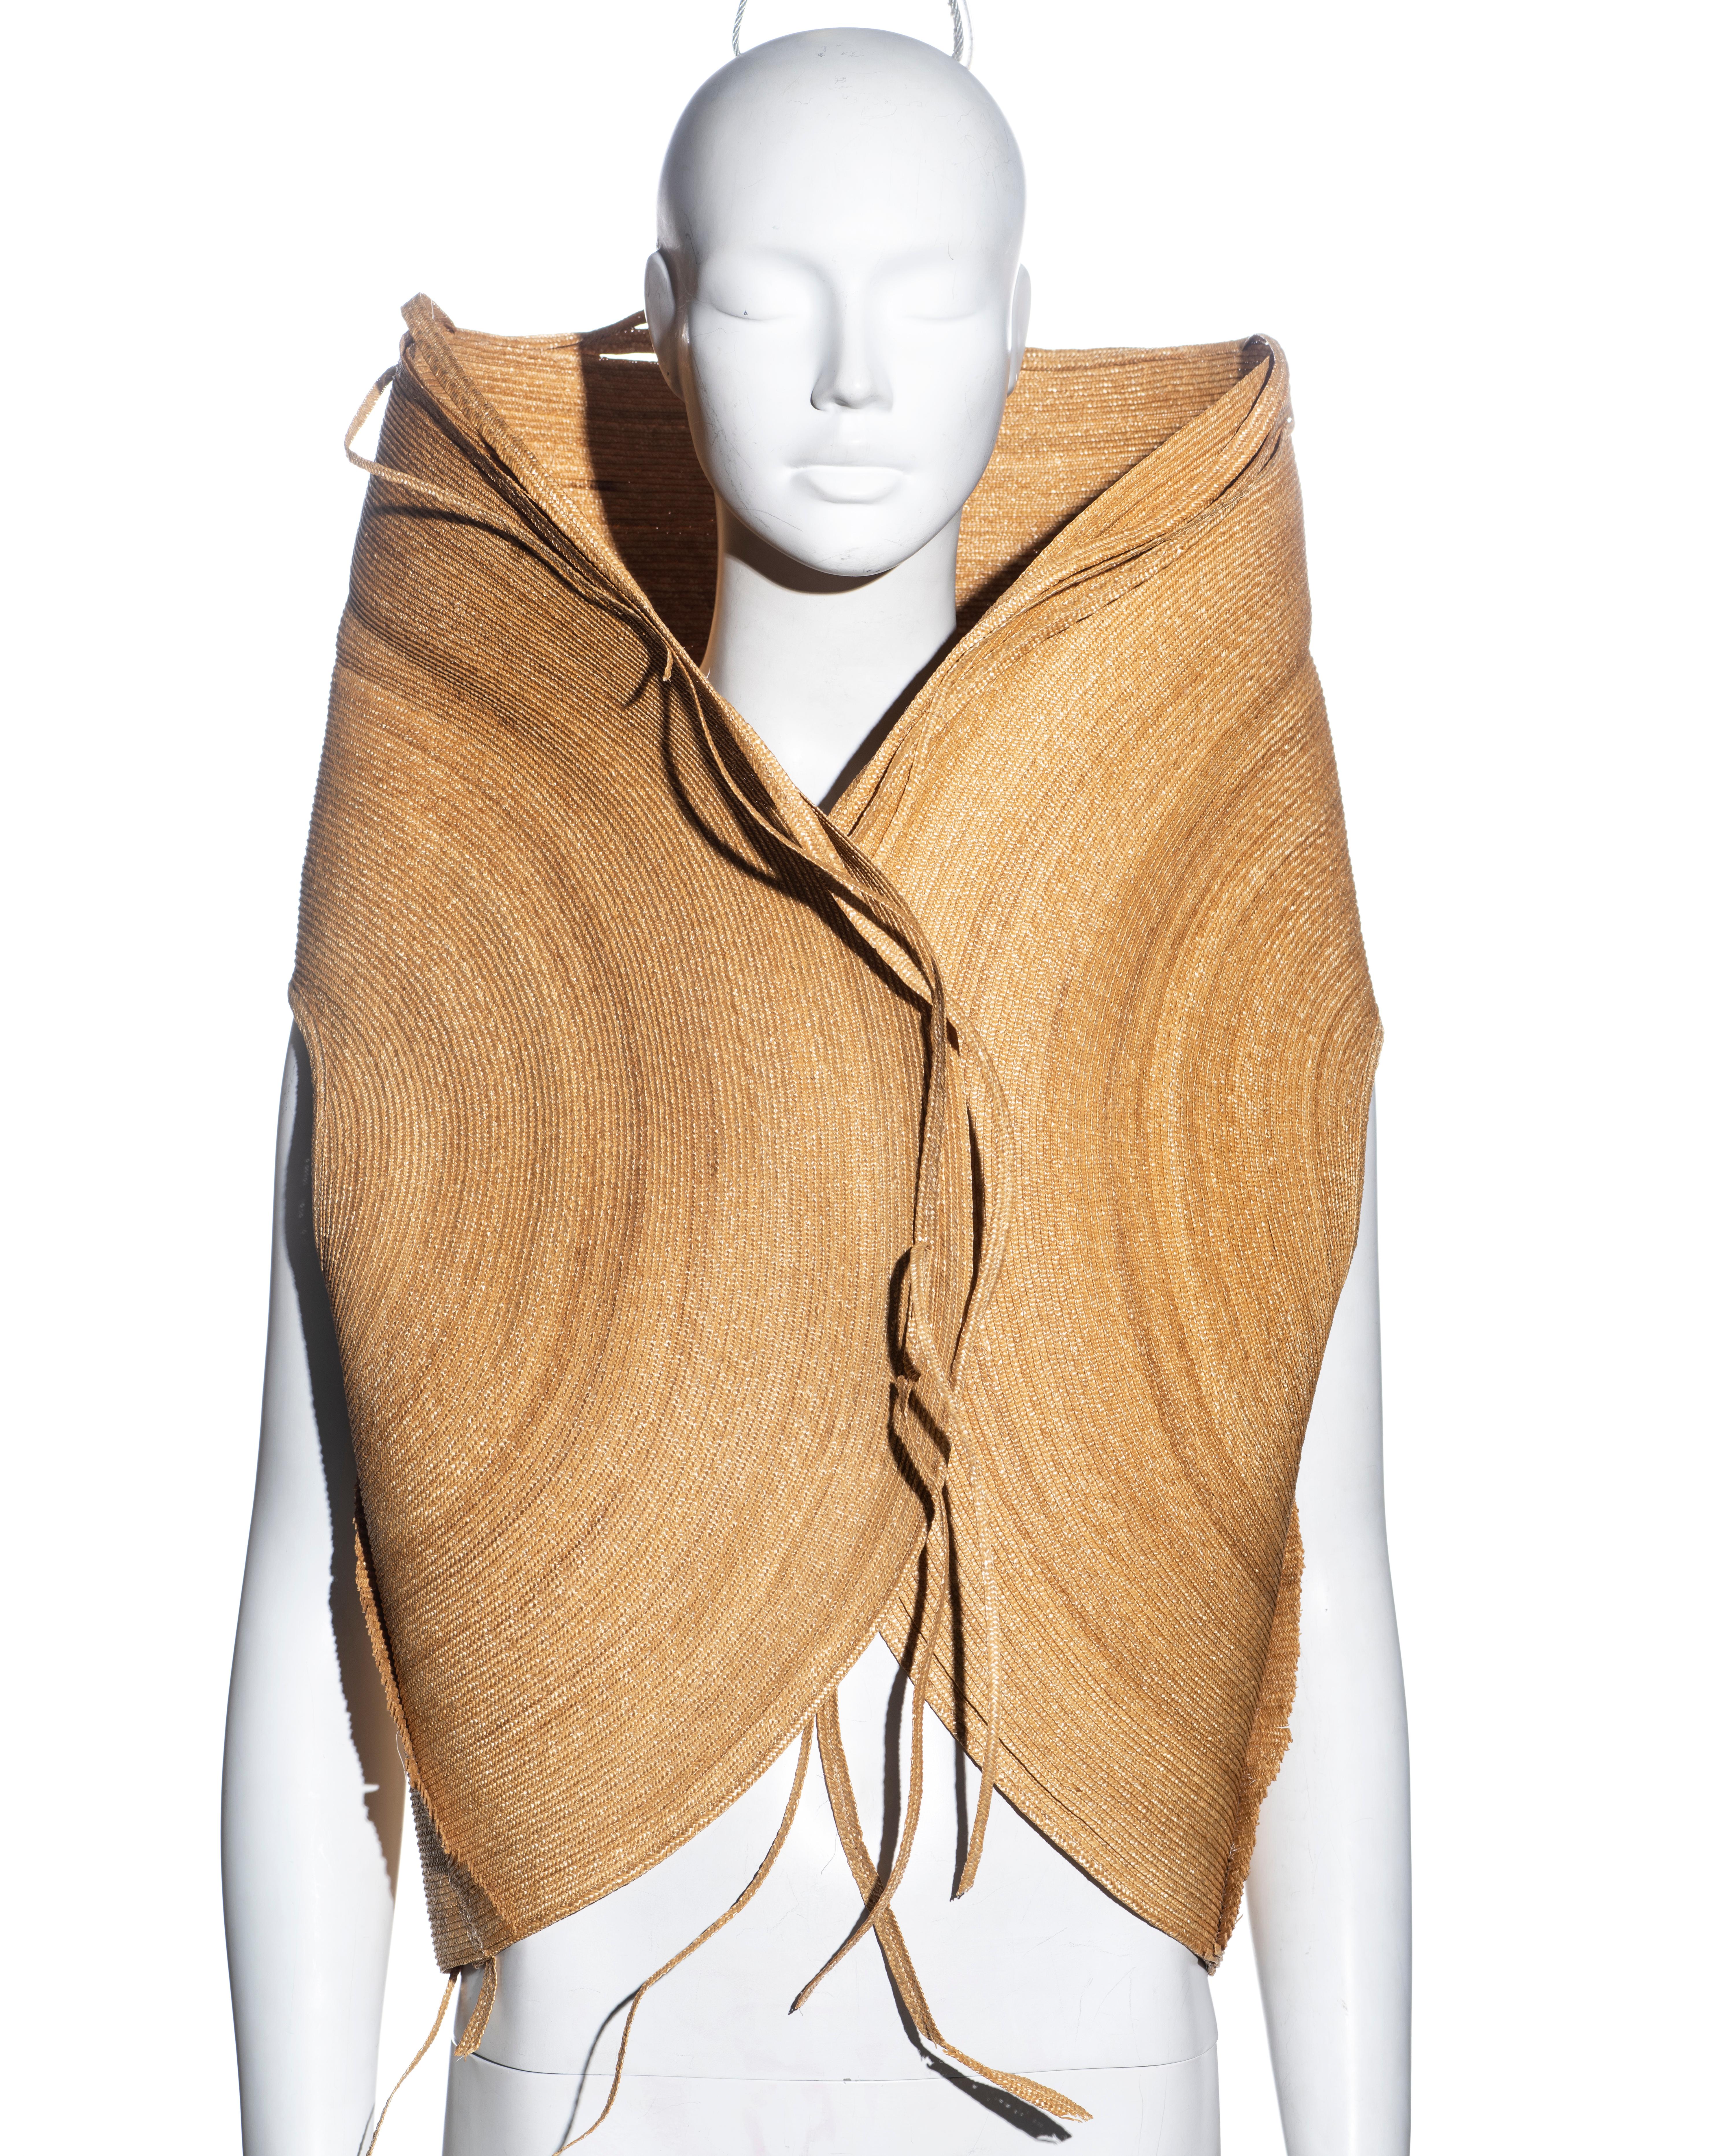 ▪ Gianfranco Ferre sleeveless jacket 
▪ Constructed from strands of straw 
▪ Large standing collar can be styled up or folded over 
▪ Snap buttons at the front opening 
▪ Singular straw strands around the edge convey a deconstructed look 
▪ Can be